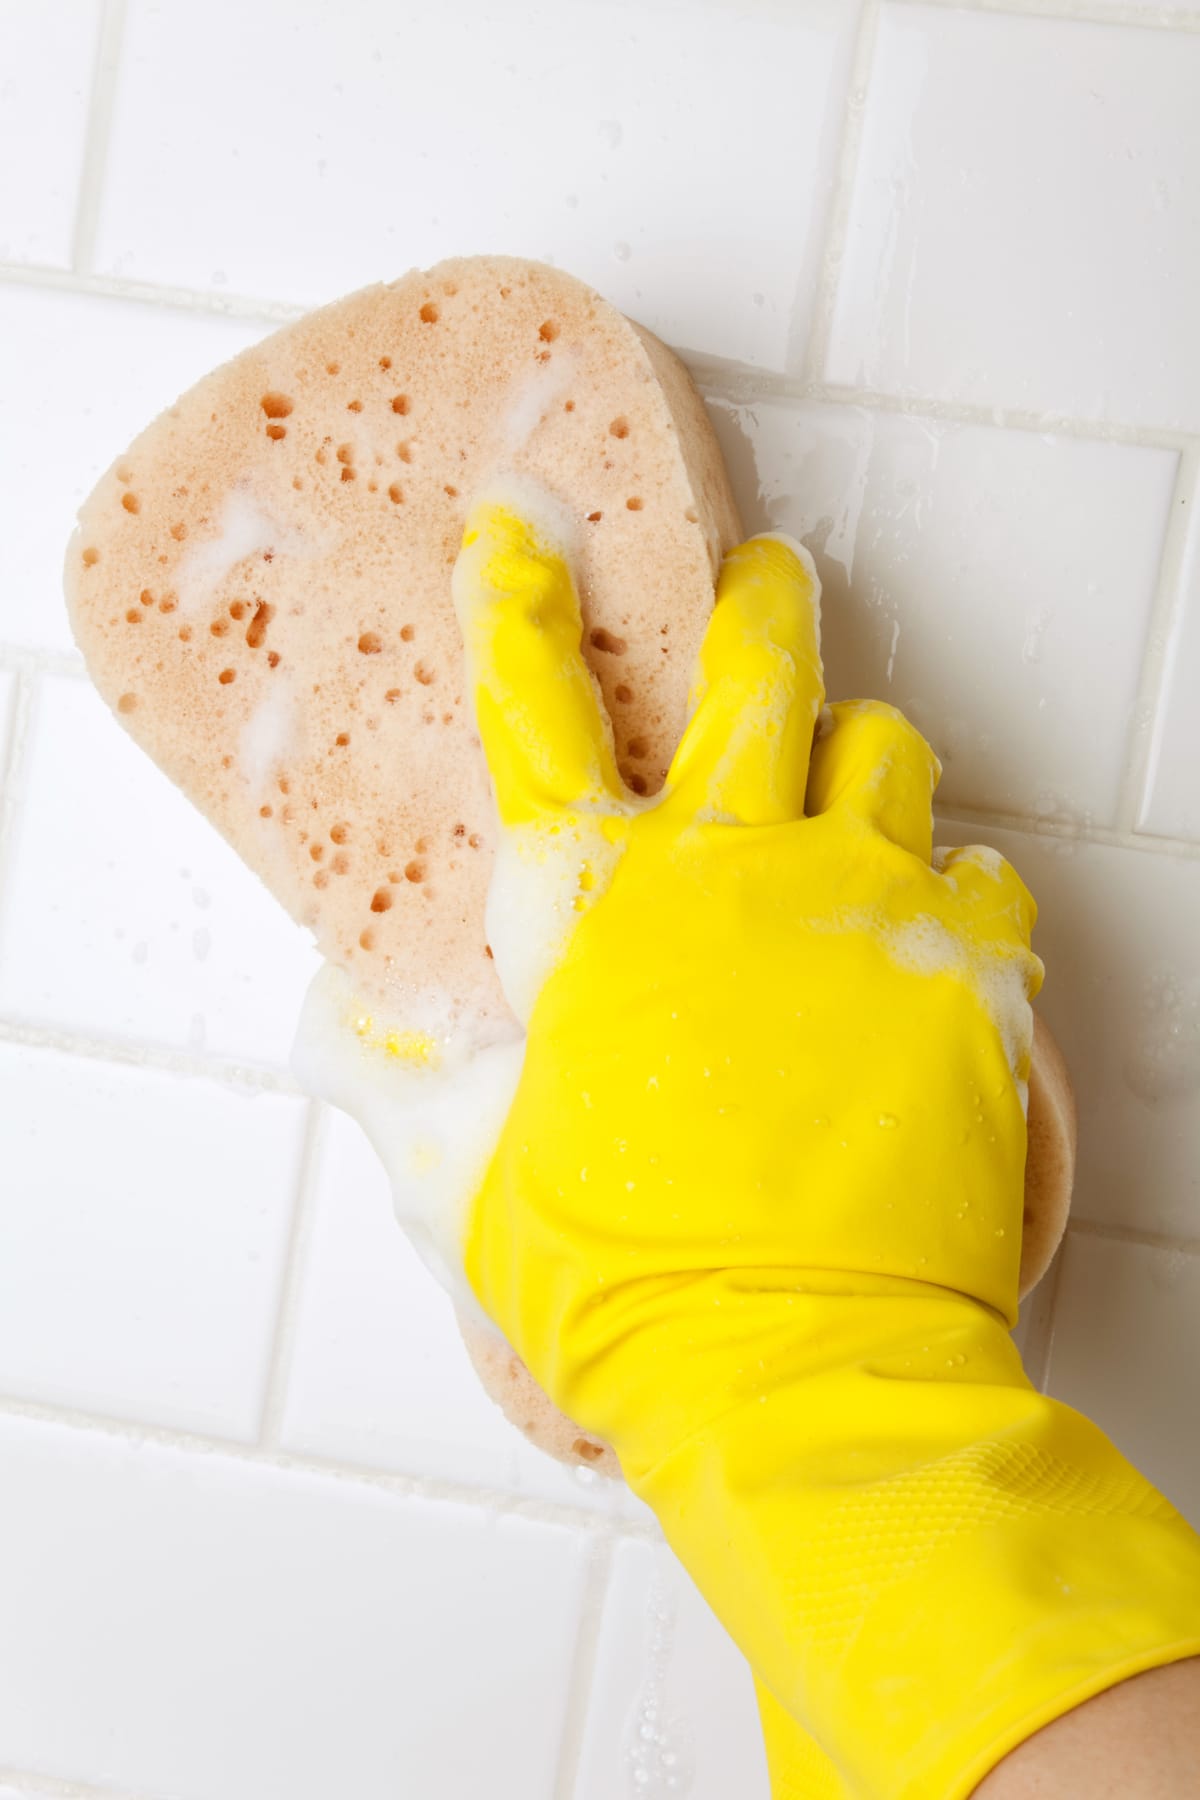 Using a sponge to clean tiles.